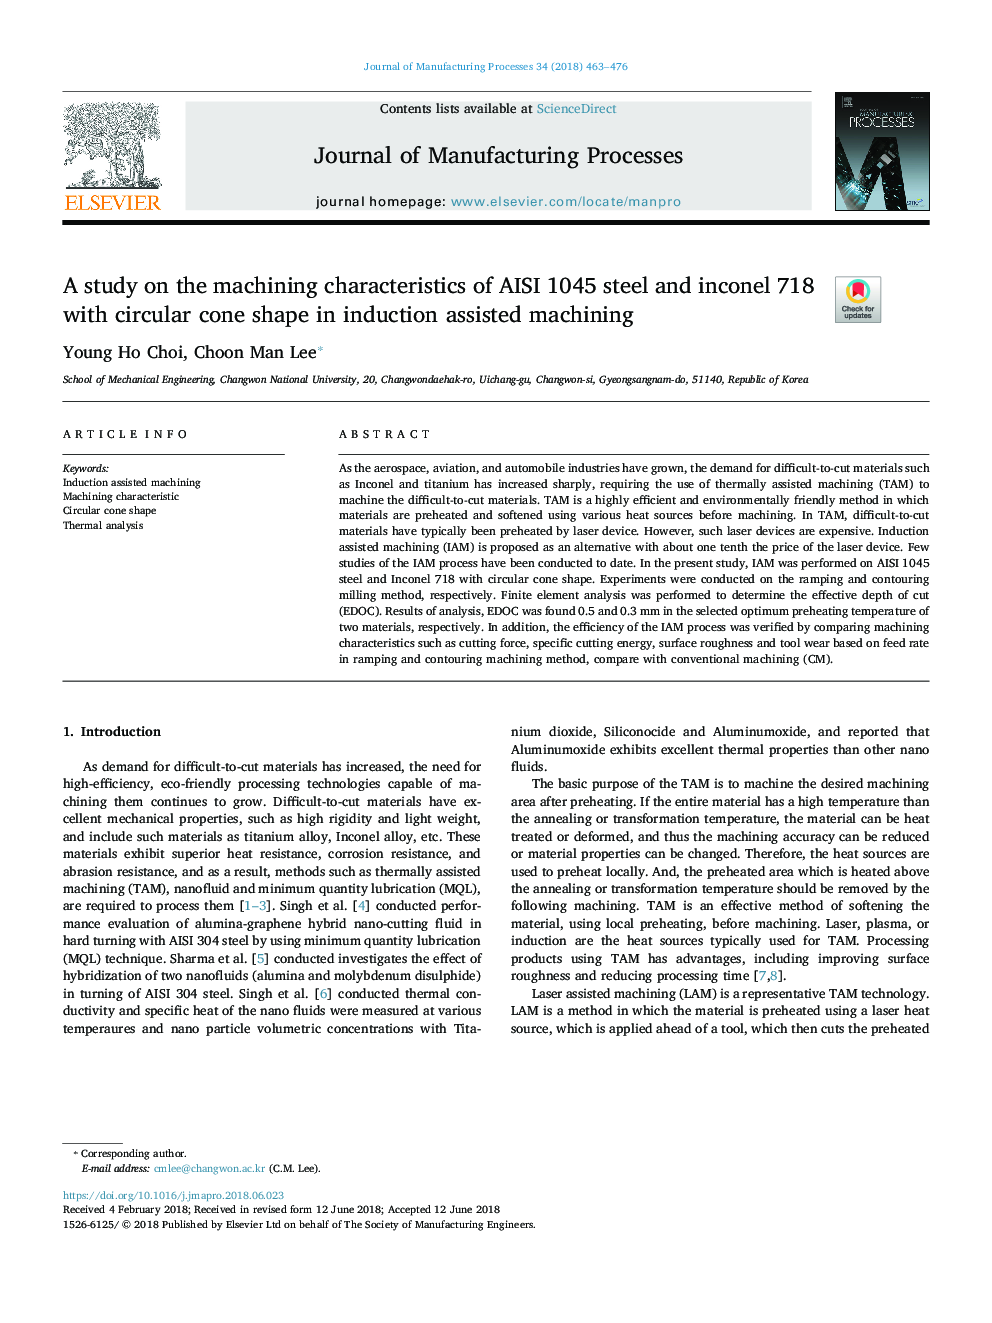 A study on the machining characteristics of AISI 1045 steel and inconel 718 with circular cone shape in induction assisted machining